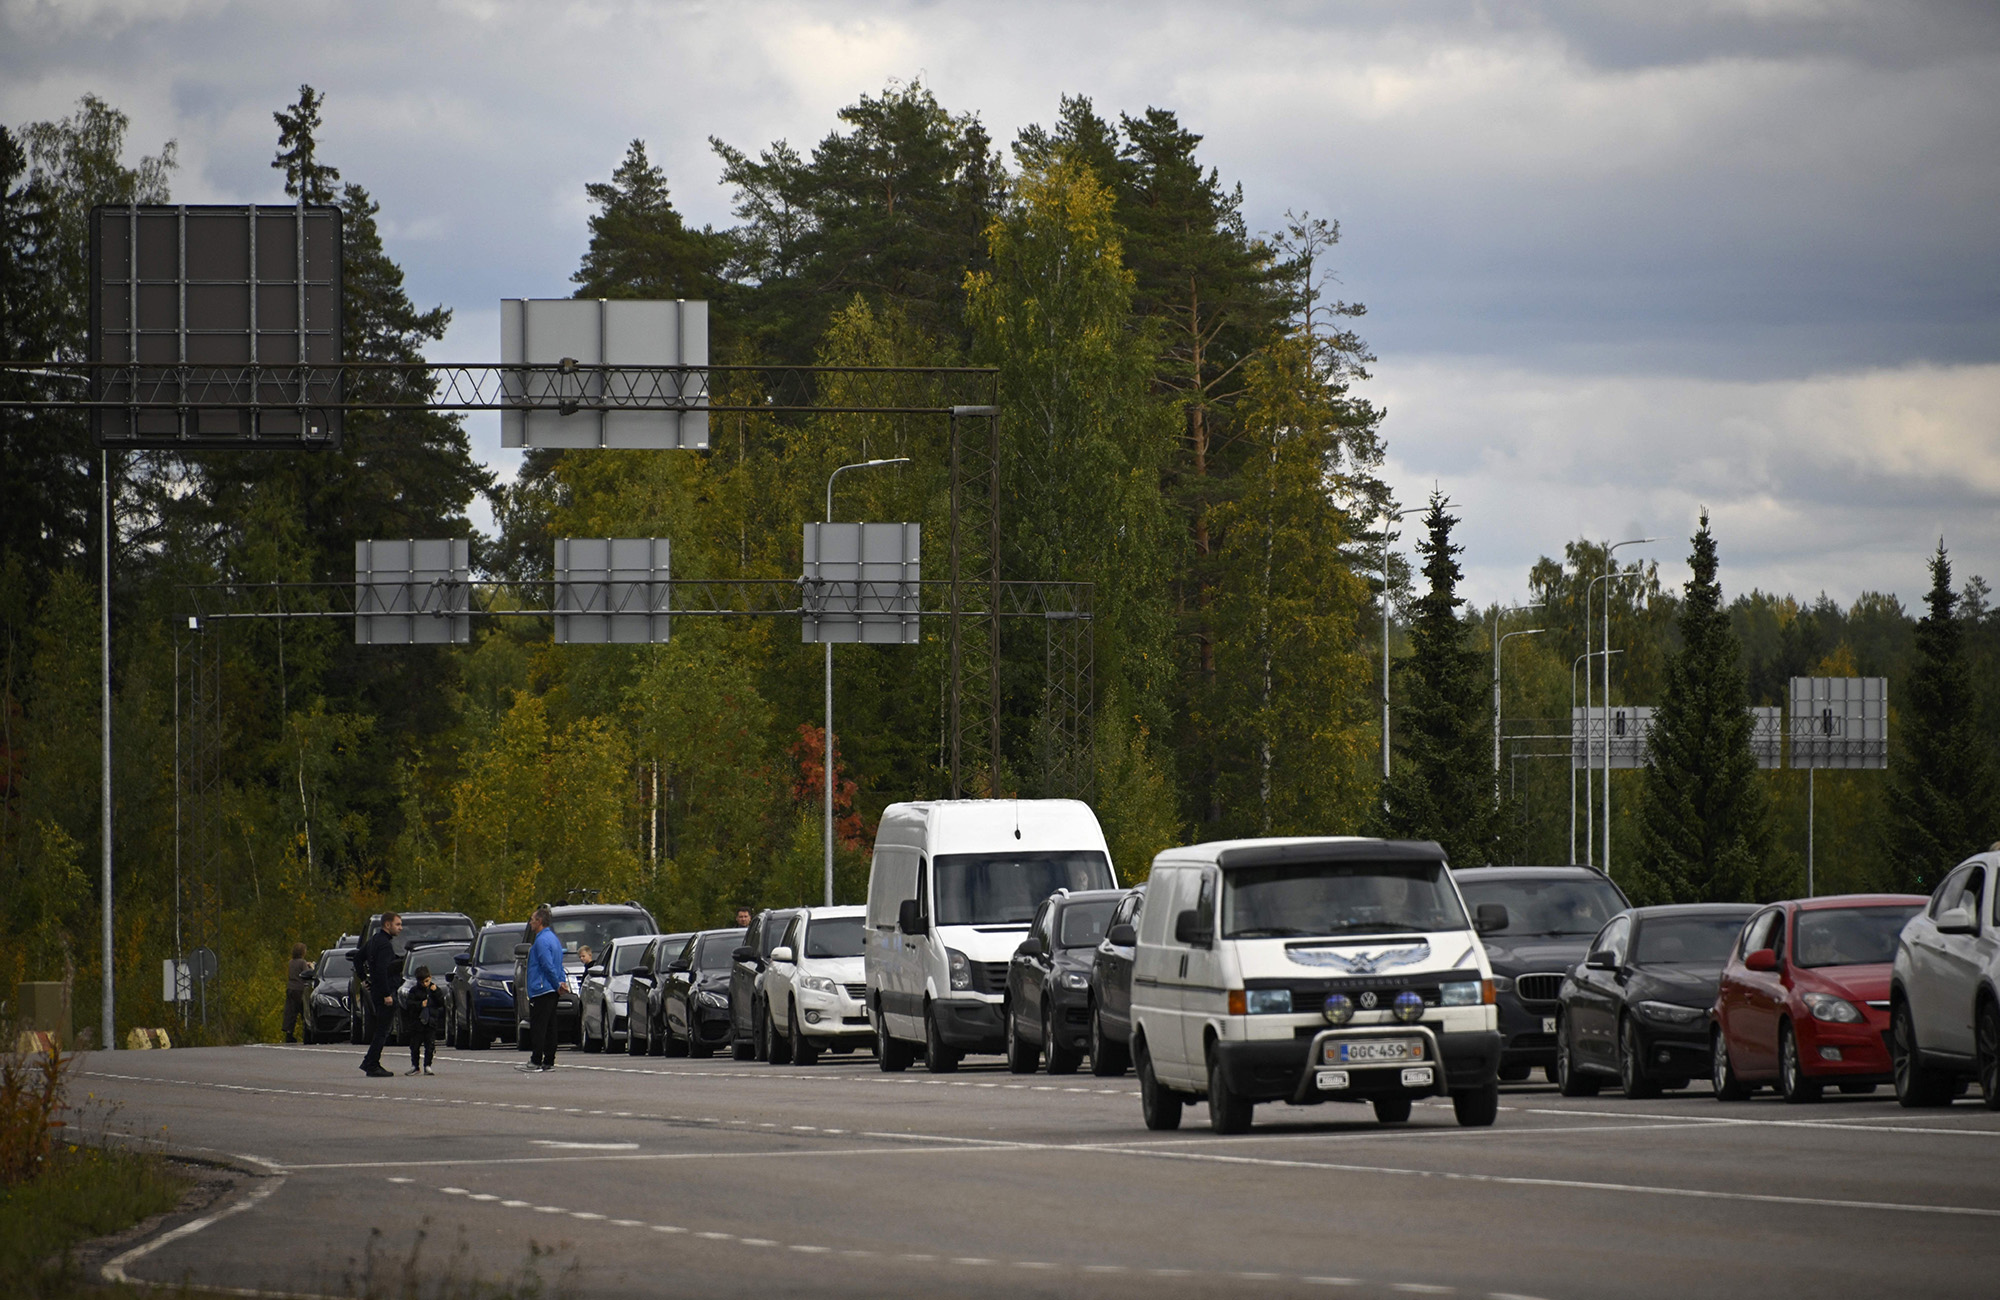 Demand for flights out of Russia is up and video shows long lines of traffic at borders after Putin announced a draft to bolster his depleted forces in Ukraine